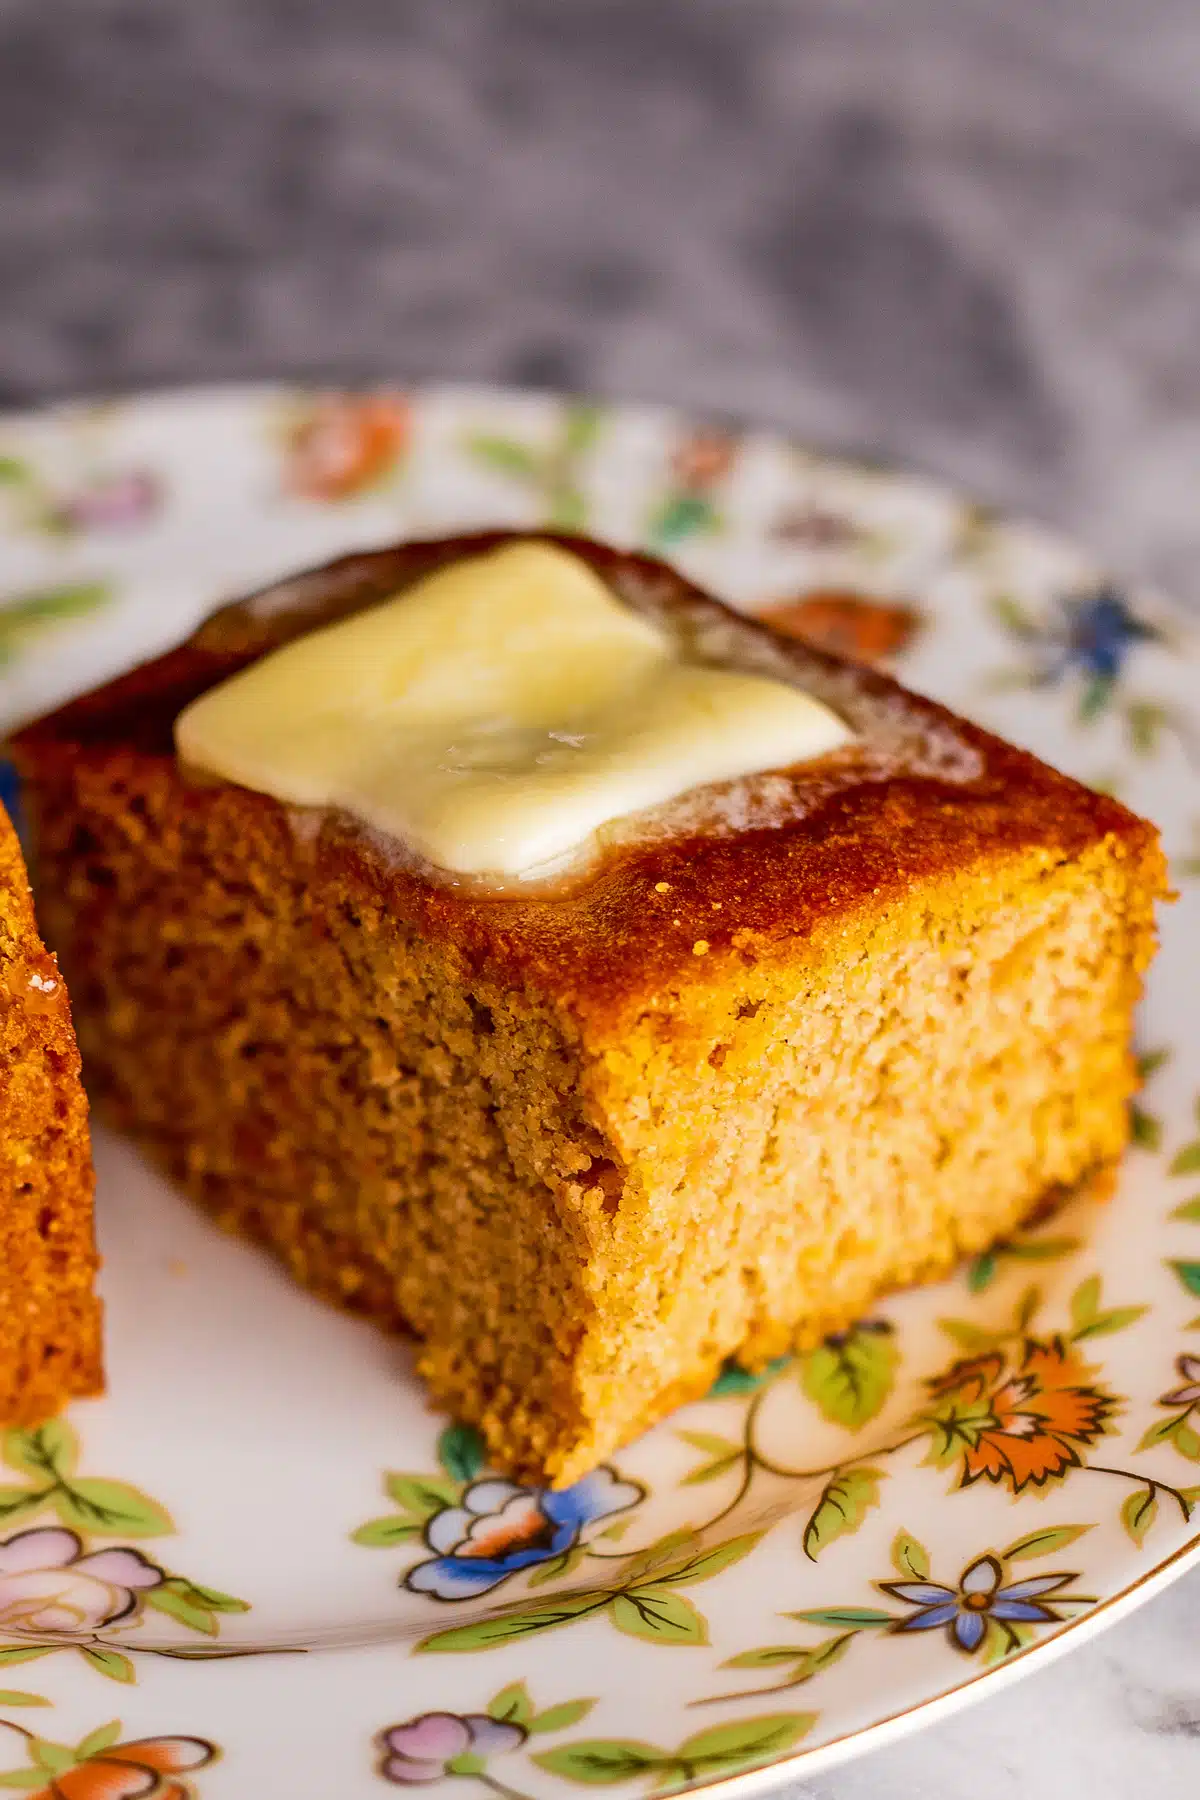 Best sweet potato cornbread recipe with my delicious cornbread sliced and served with butter.